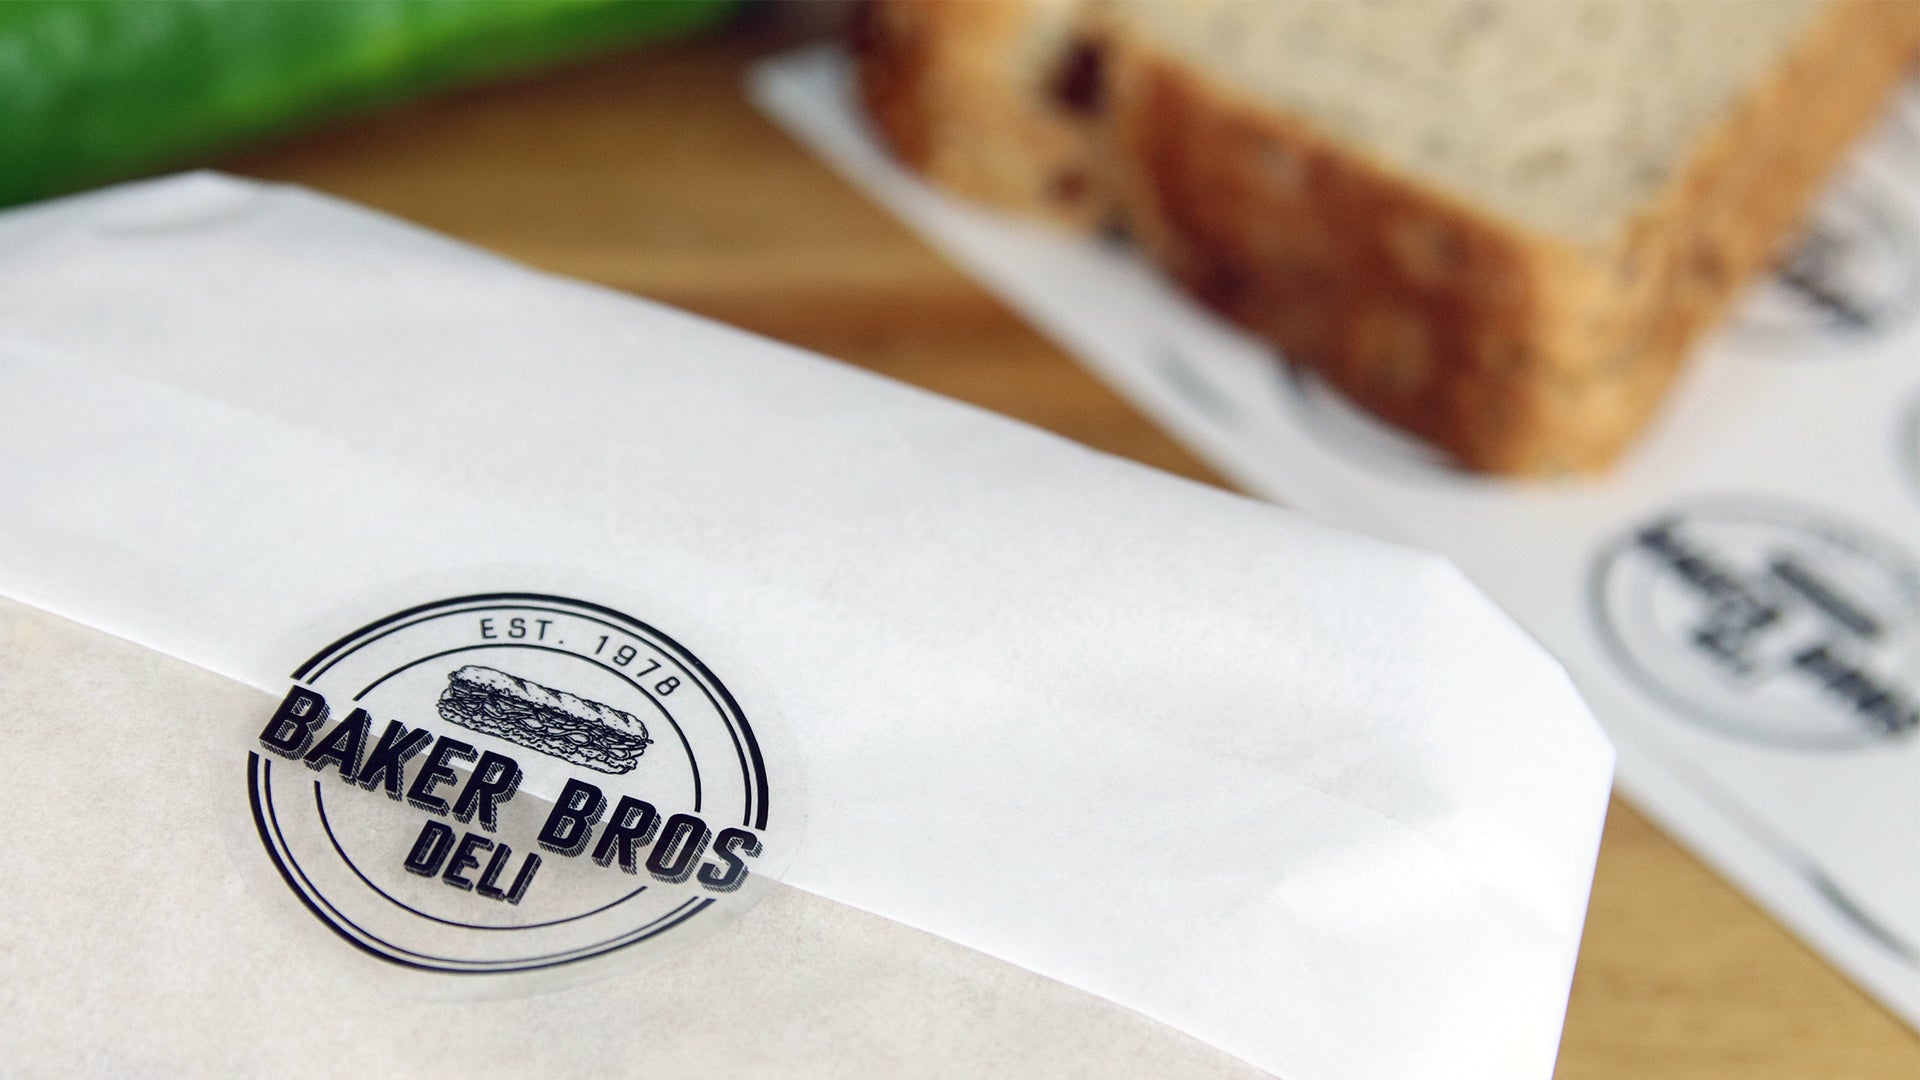 Transparent eco-friendly label round with baker bros logo applied to seal a sandwich wrapper